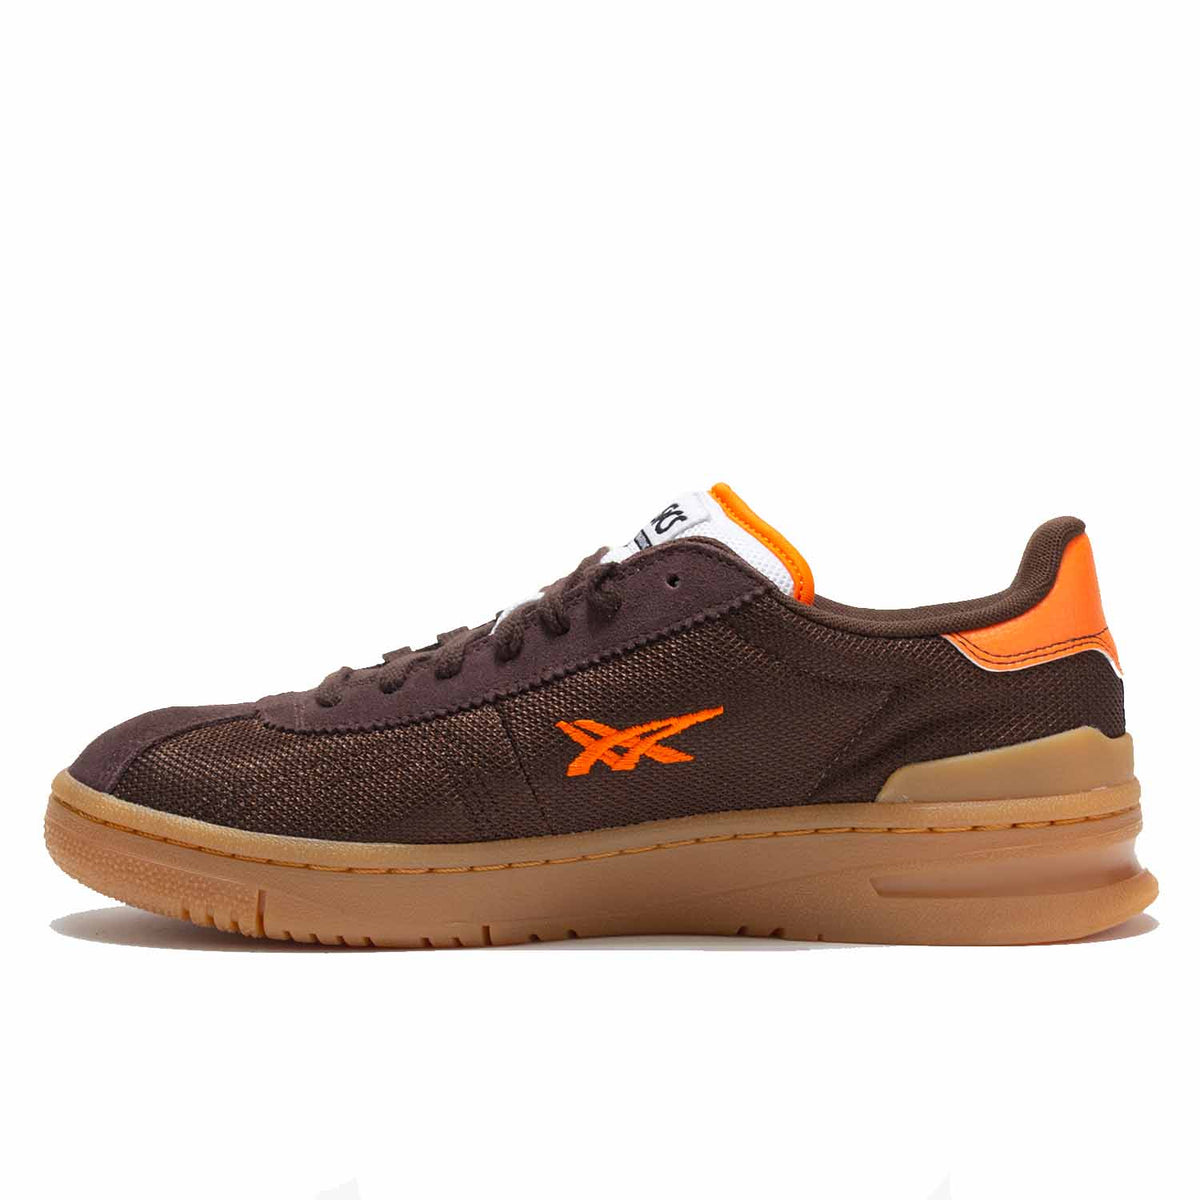 Asics Vic NBD in coffee colored brown suede.  Inside of shoe is mesh for breathability. Smaller embroidered Asics logo on inside of shoe. Orange leather accents on heel, and side. Orange leather Asics logo. Orange piping on white puffy tongue. Light brown slightly translucent sole.